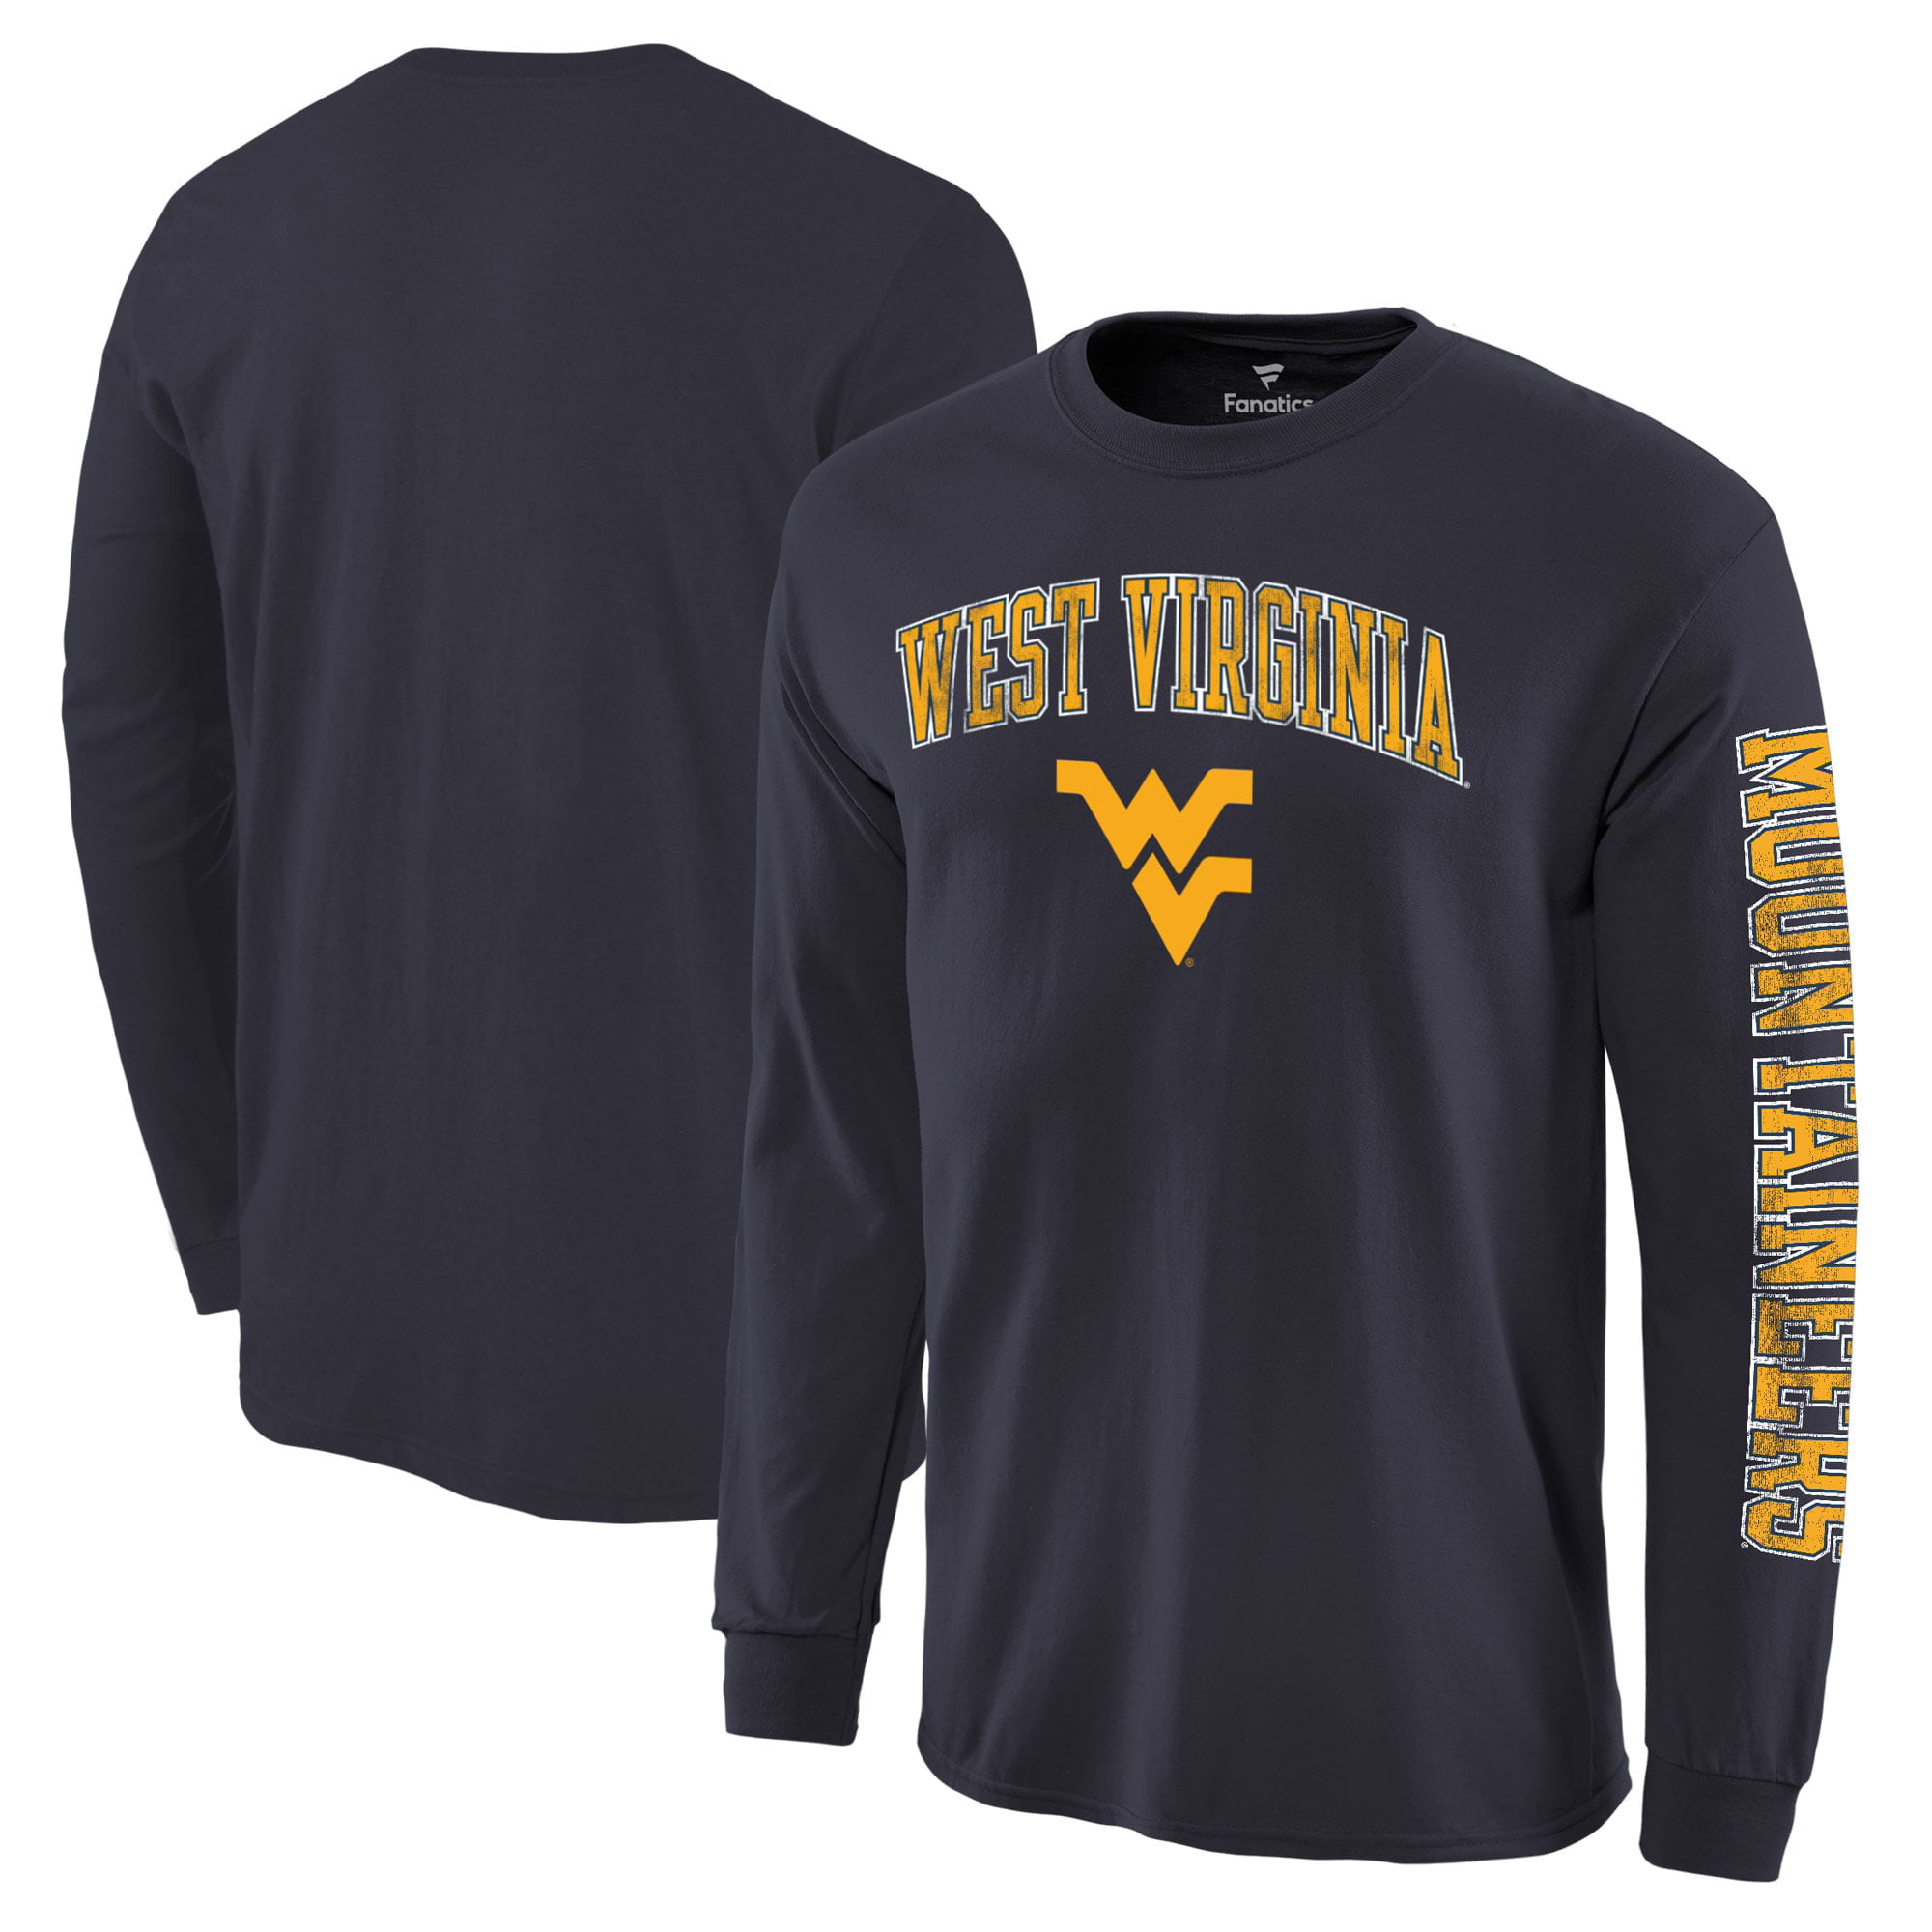 West Virginia Mountaineer's Pigskin T-Shirt Size X Large 